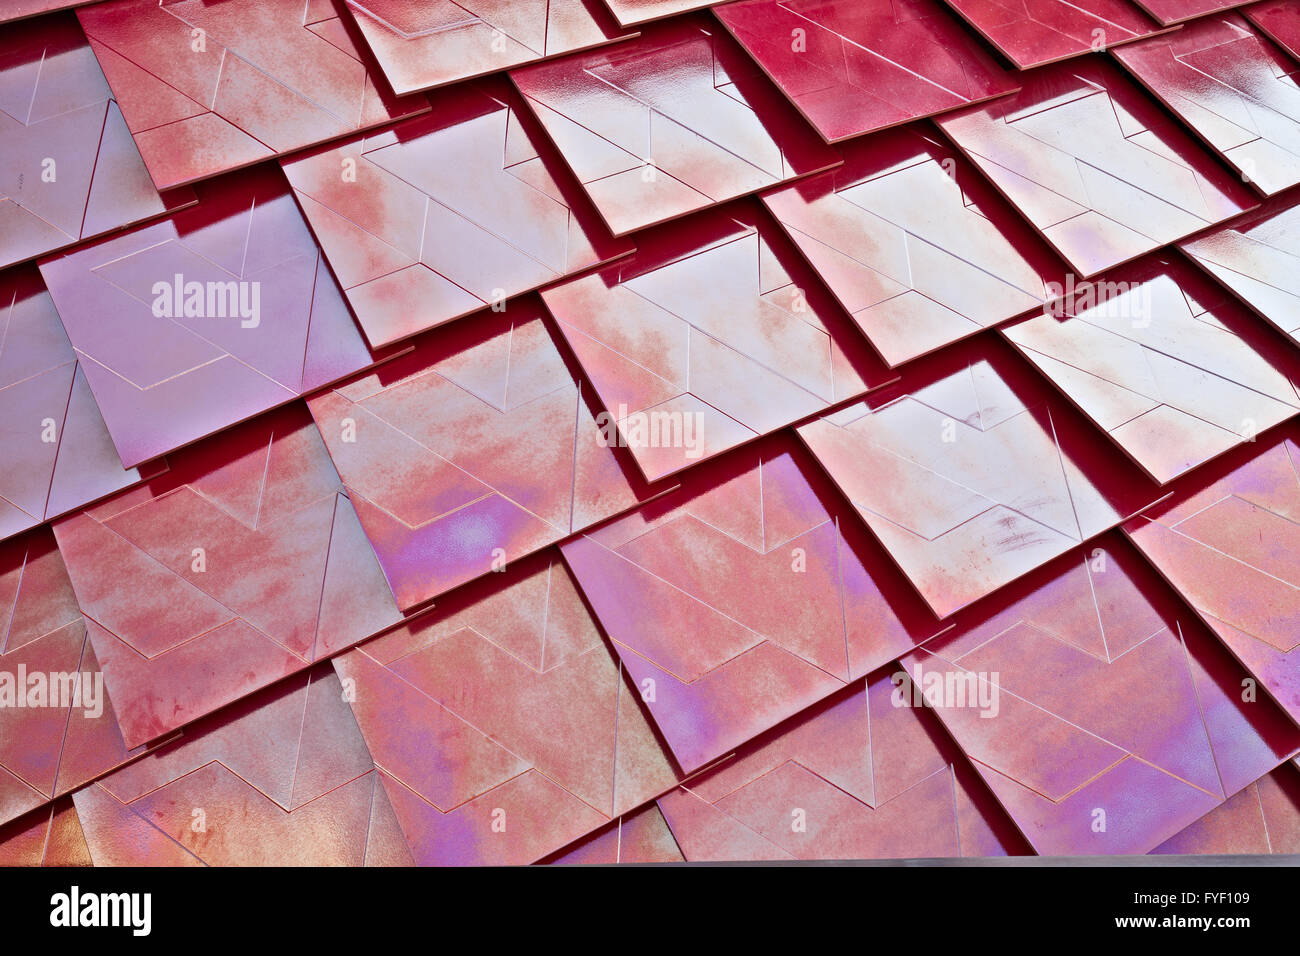 detail of red modern metal tile roof Stock Photo